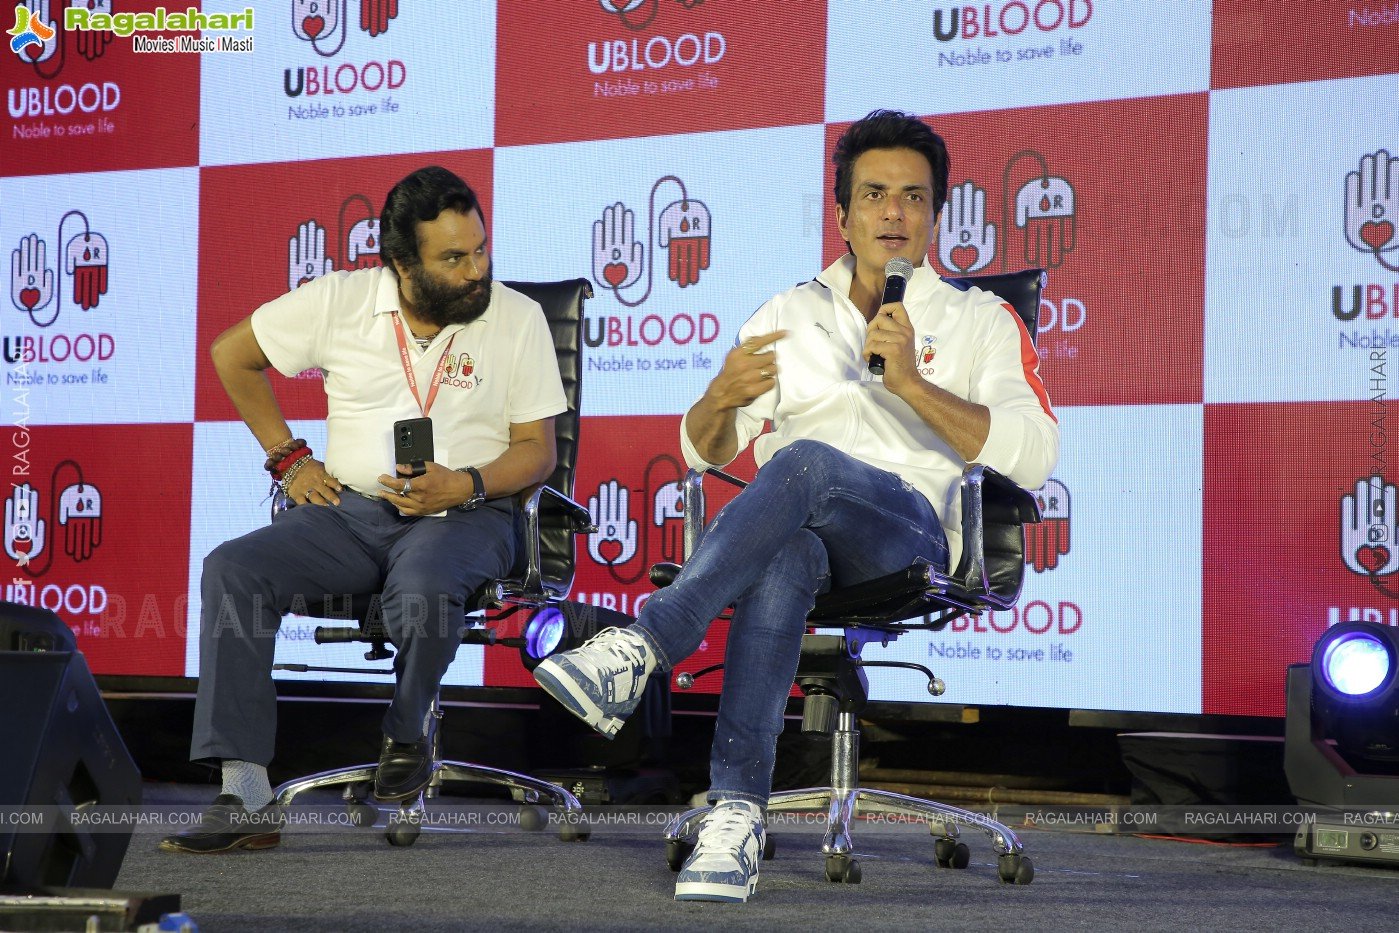 Sonu Sood Launches India's Biggest Blood Donor App UBLOOD